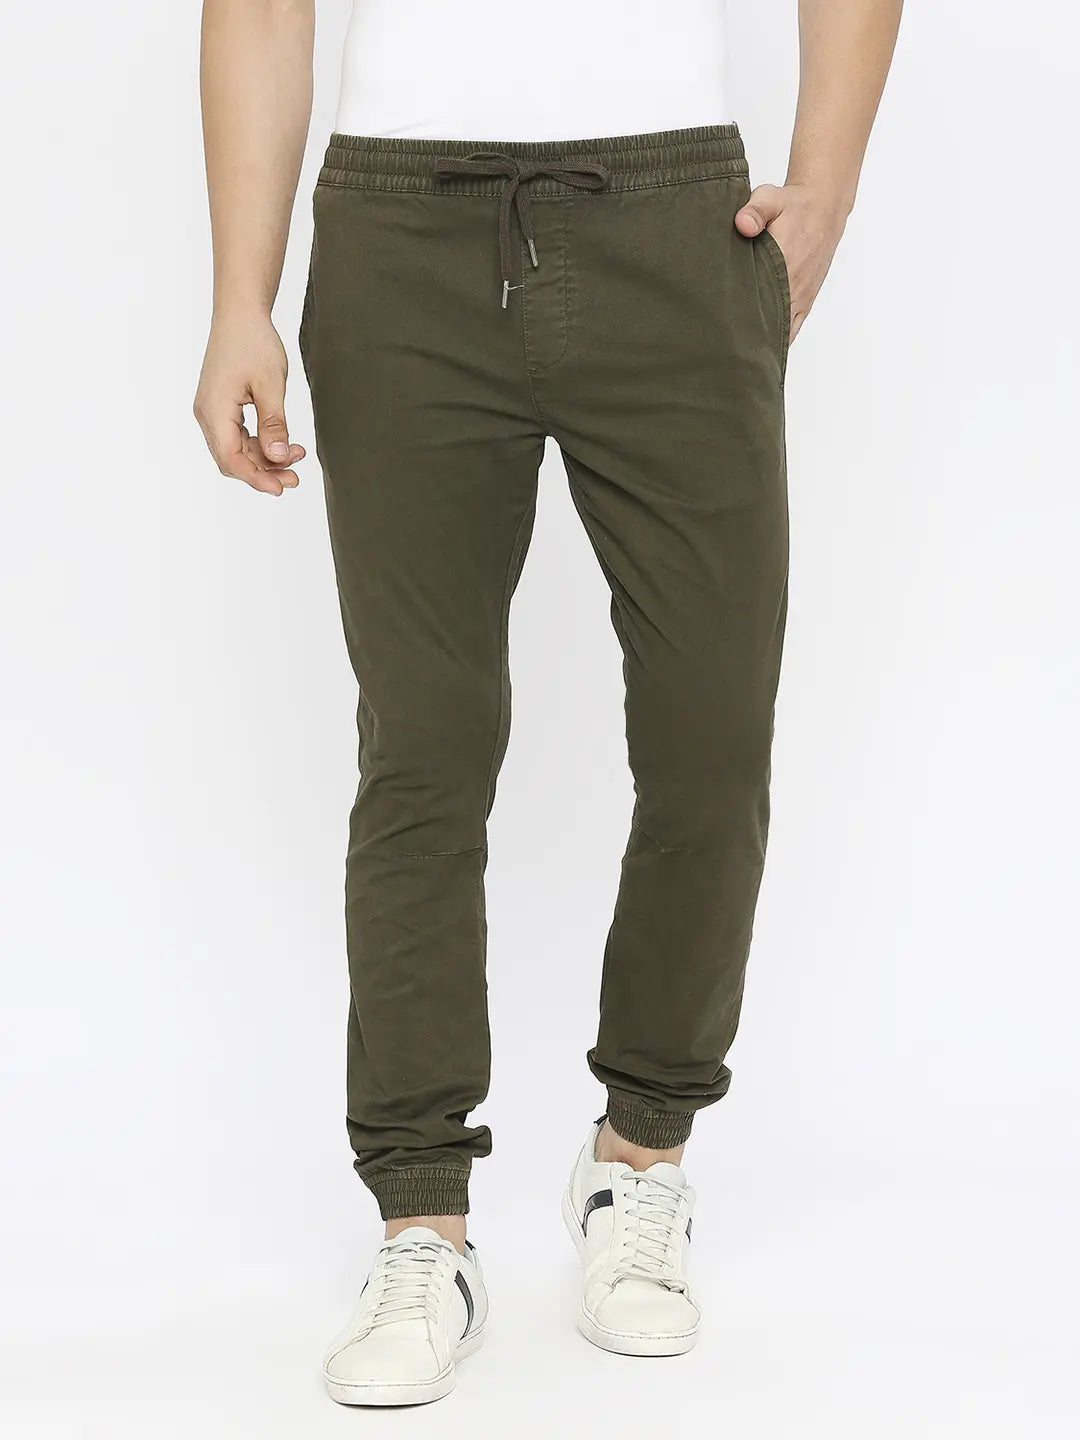 Casual Trousers in Delhi Made to Measure Trousers Online in Delhi